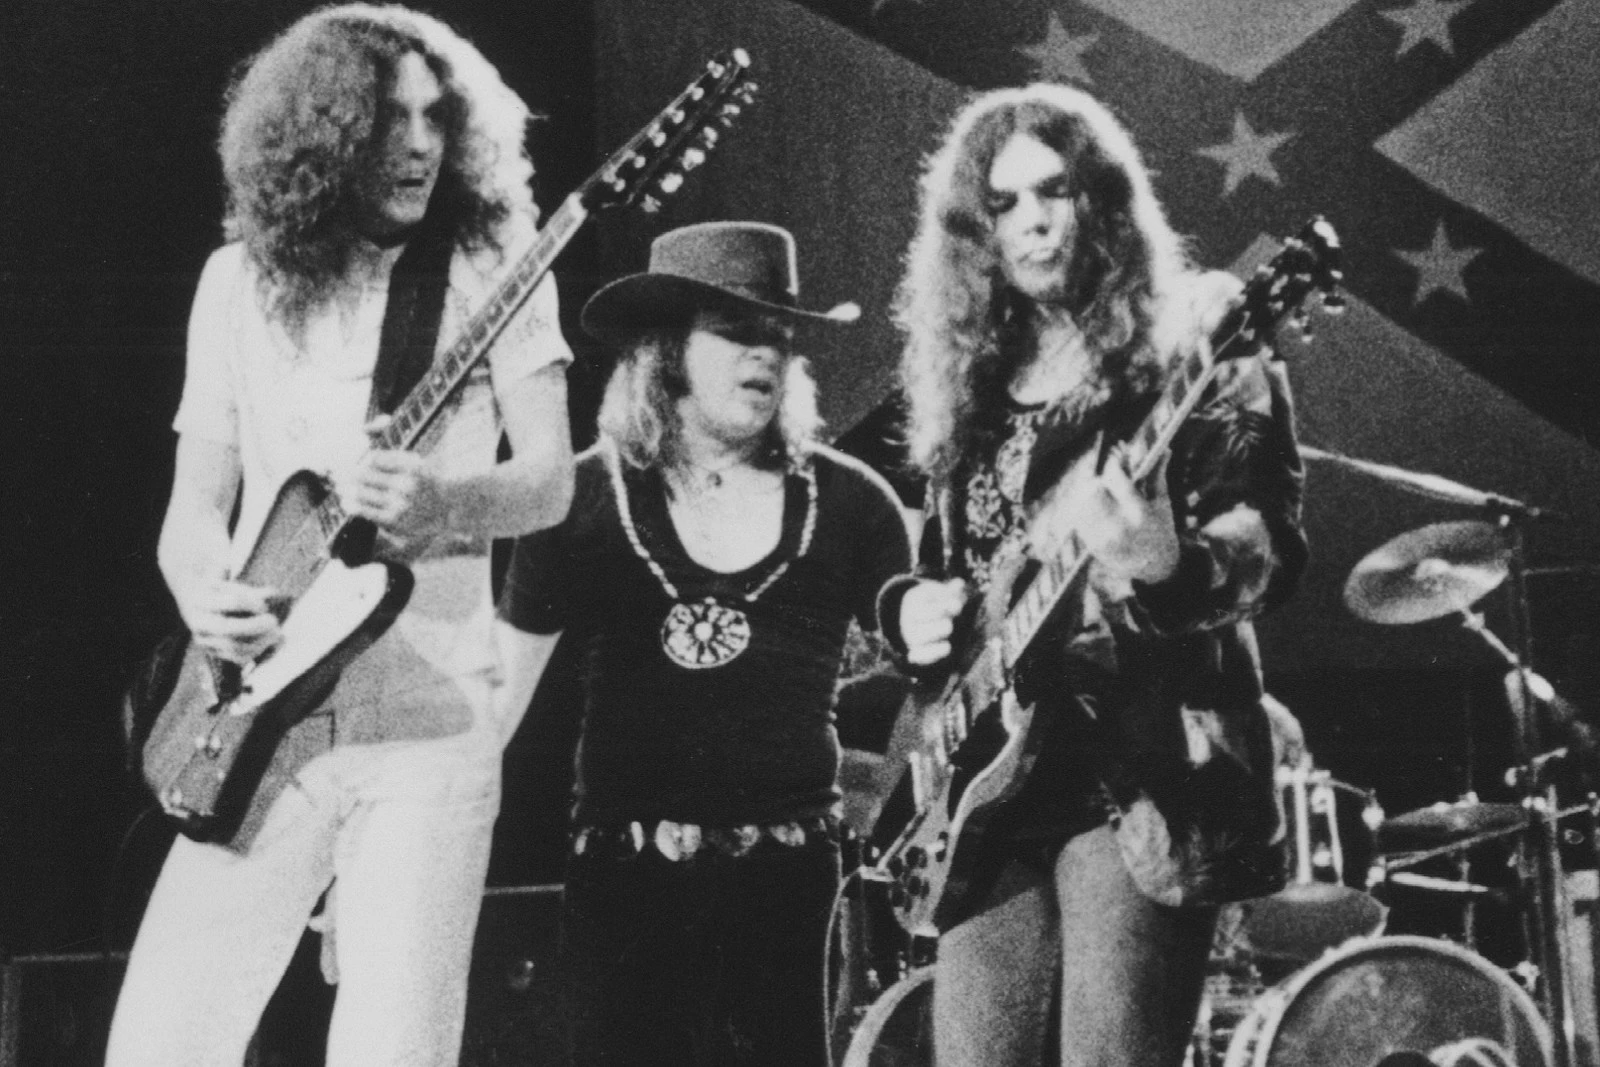 Lynyrd skynyrd is an american rock band best known for popularizing the sou...